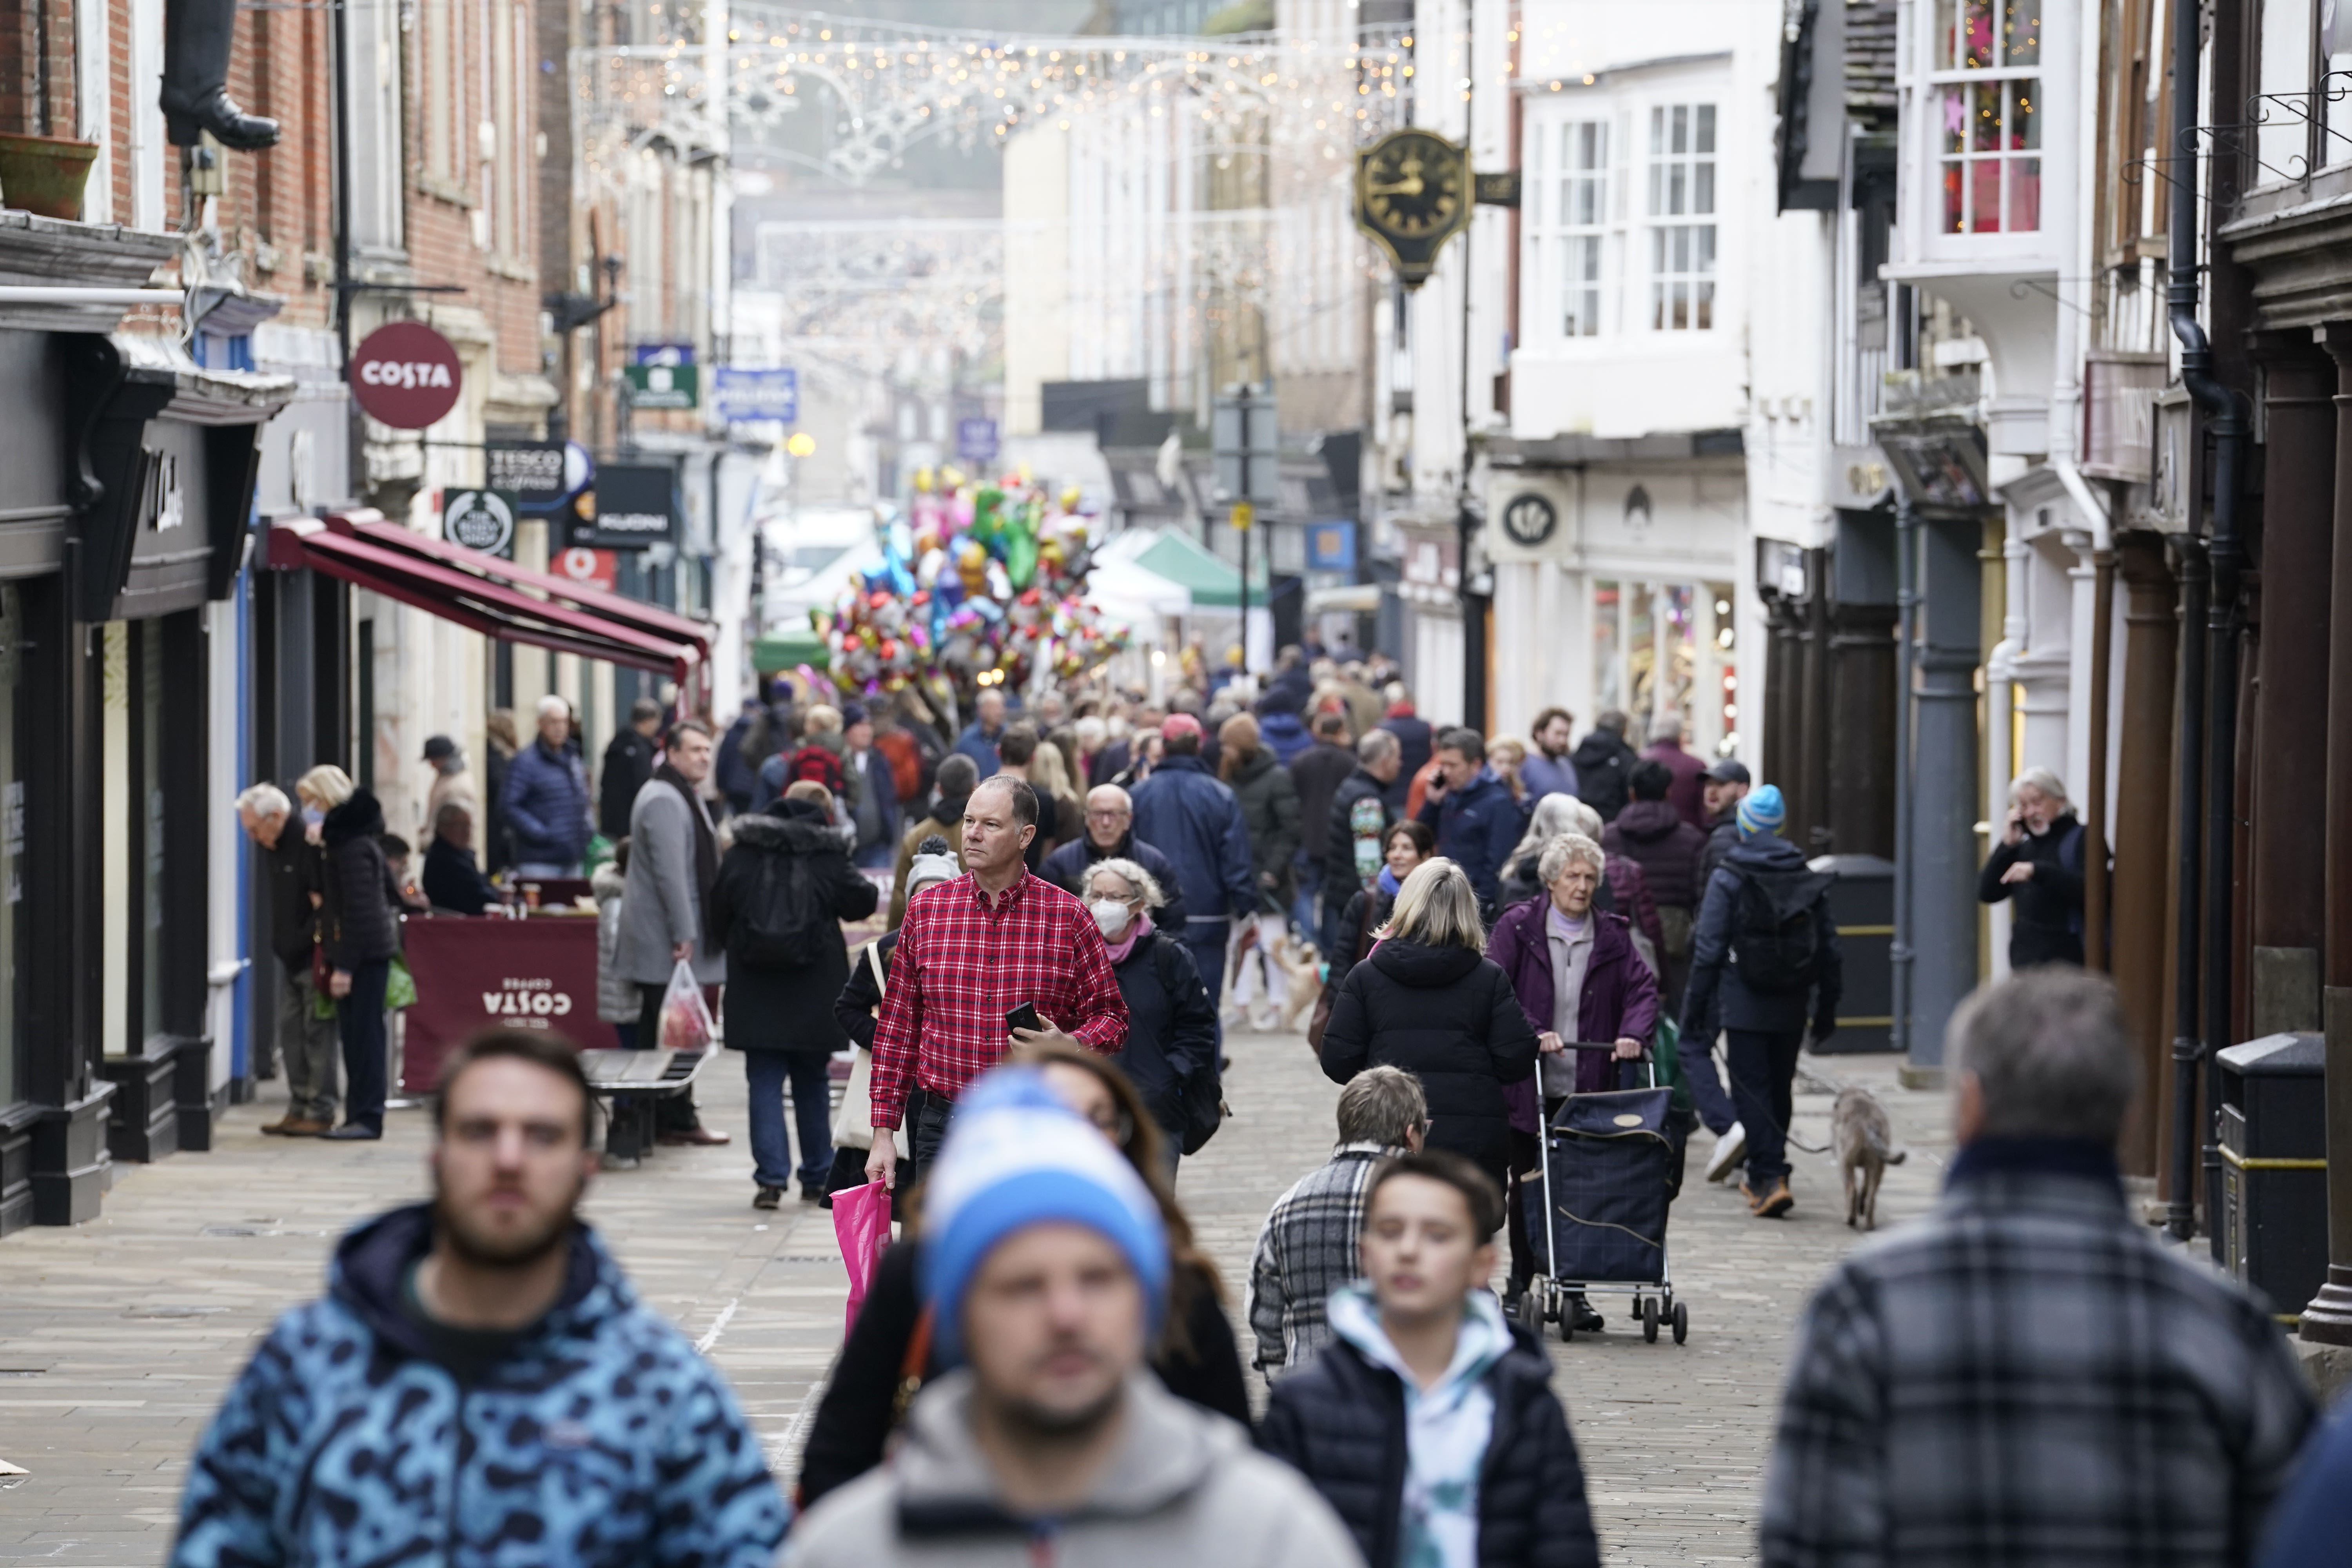 It was not only the high street that was affected, retailers were also disappointed by weak growth in online sales